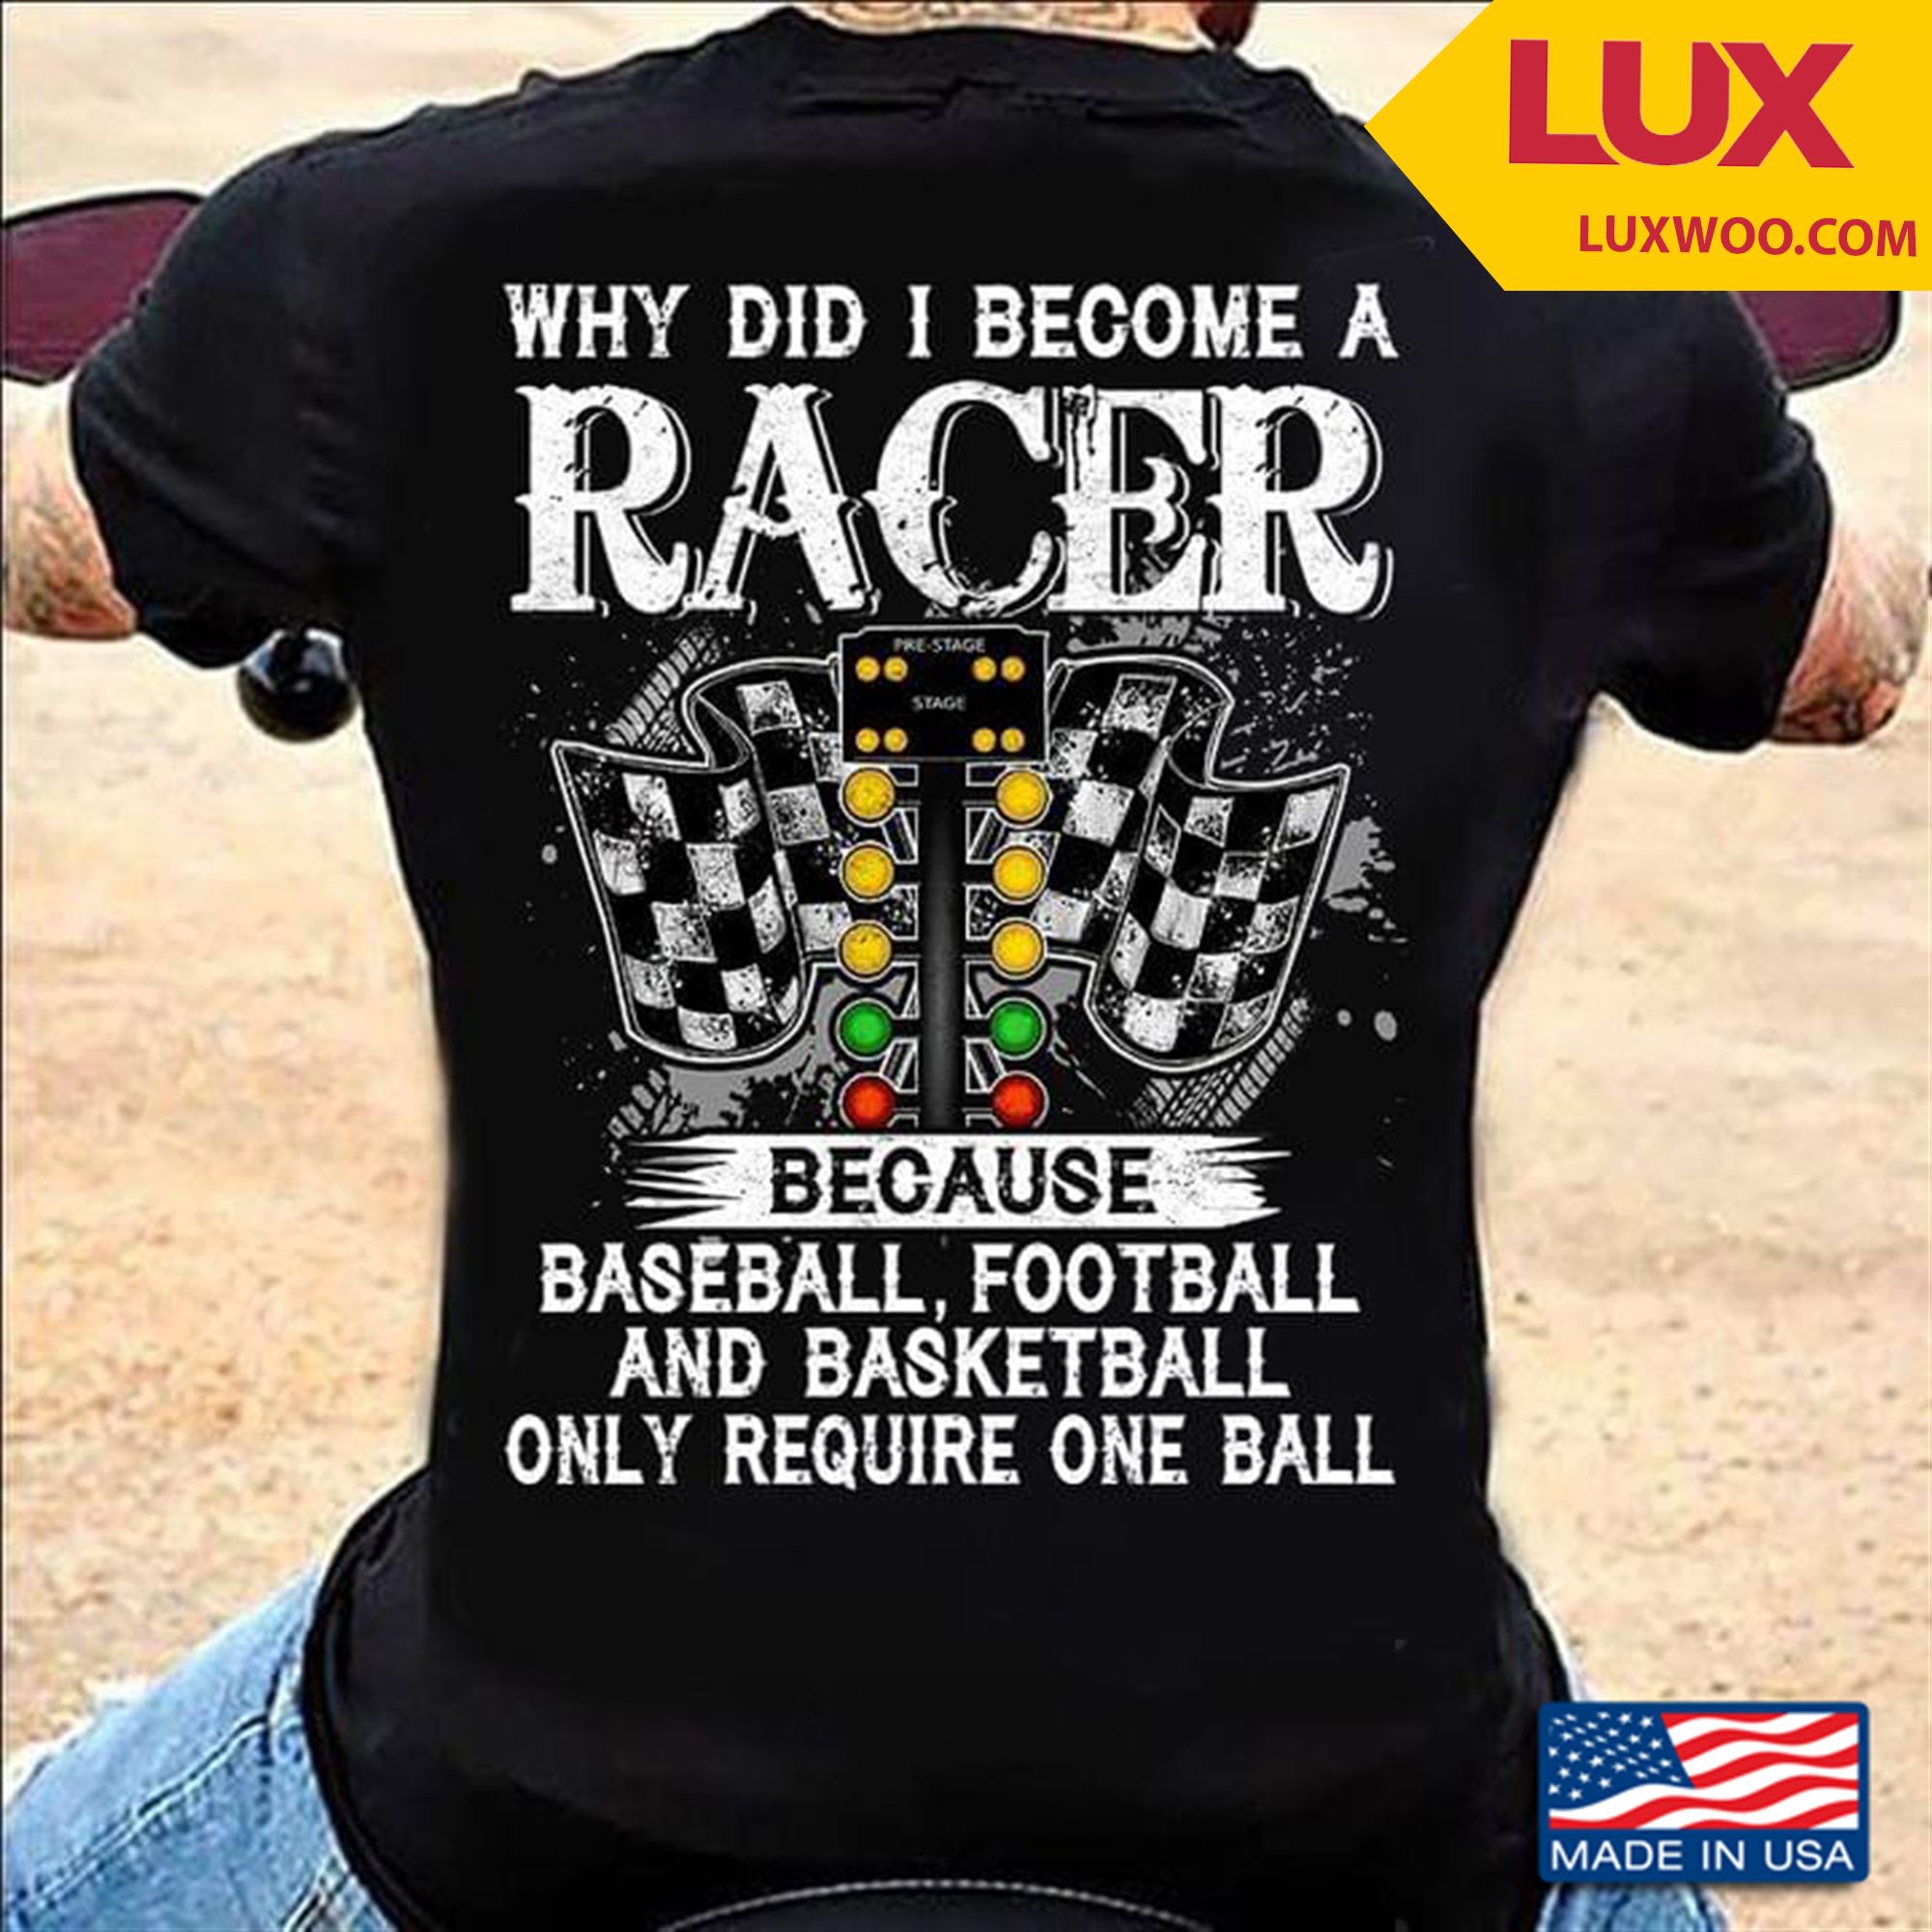 Why Did I Become A Racer Because Baseball Football And Basketball Only Require One Ball Tshirt Size Up To 5xl